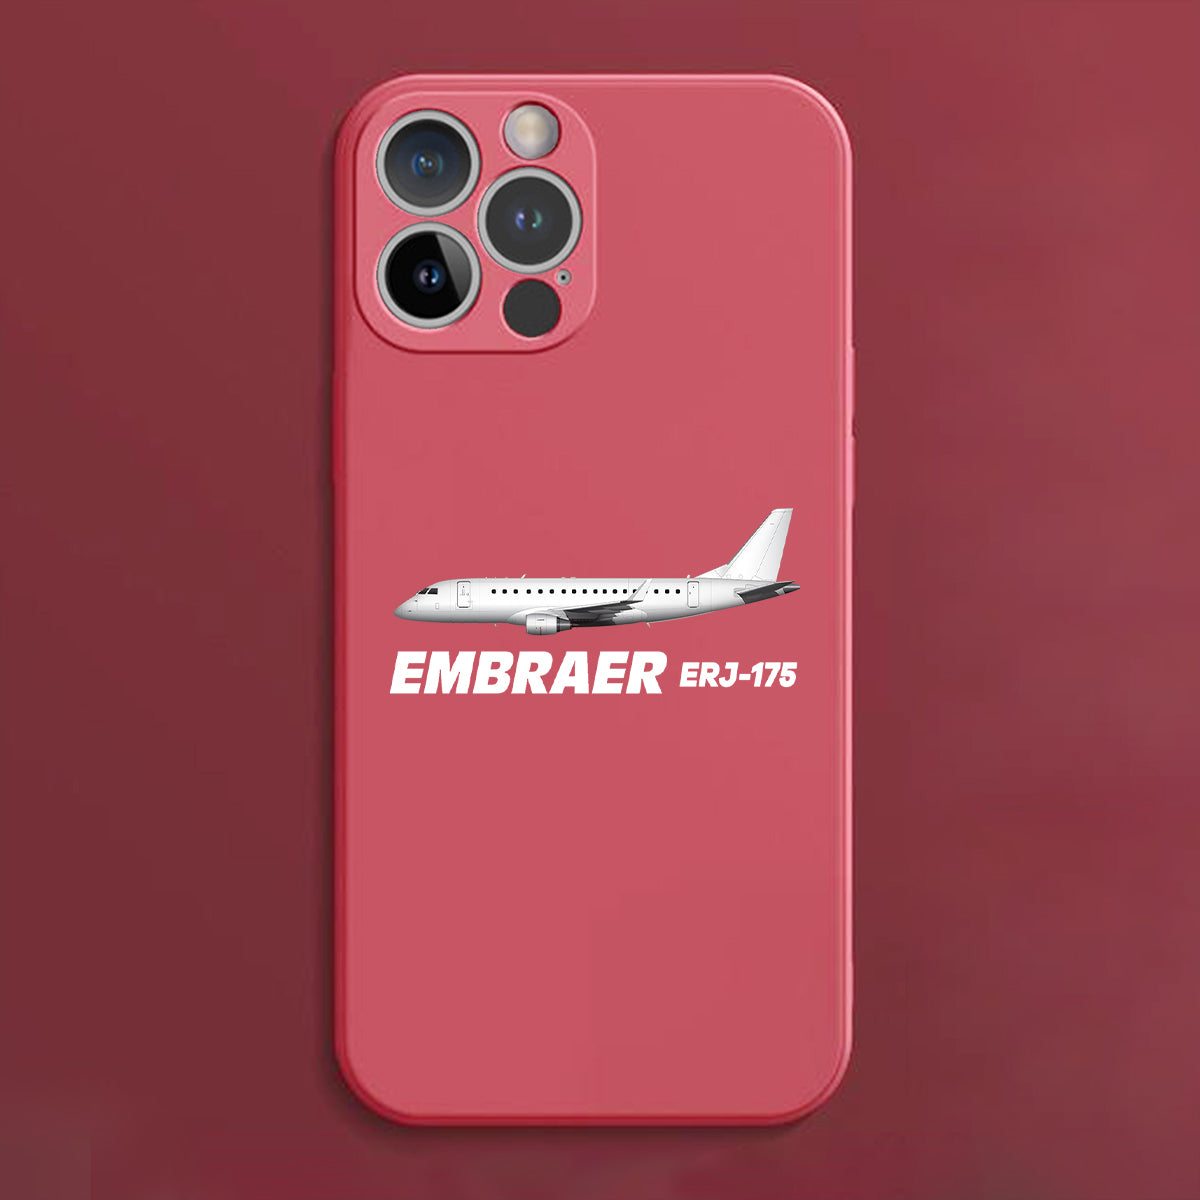 The Embraer ERJ-175 Designed Soft Silicone iPhone Cases